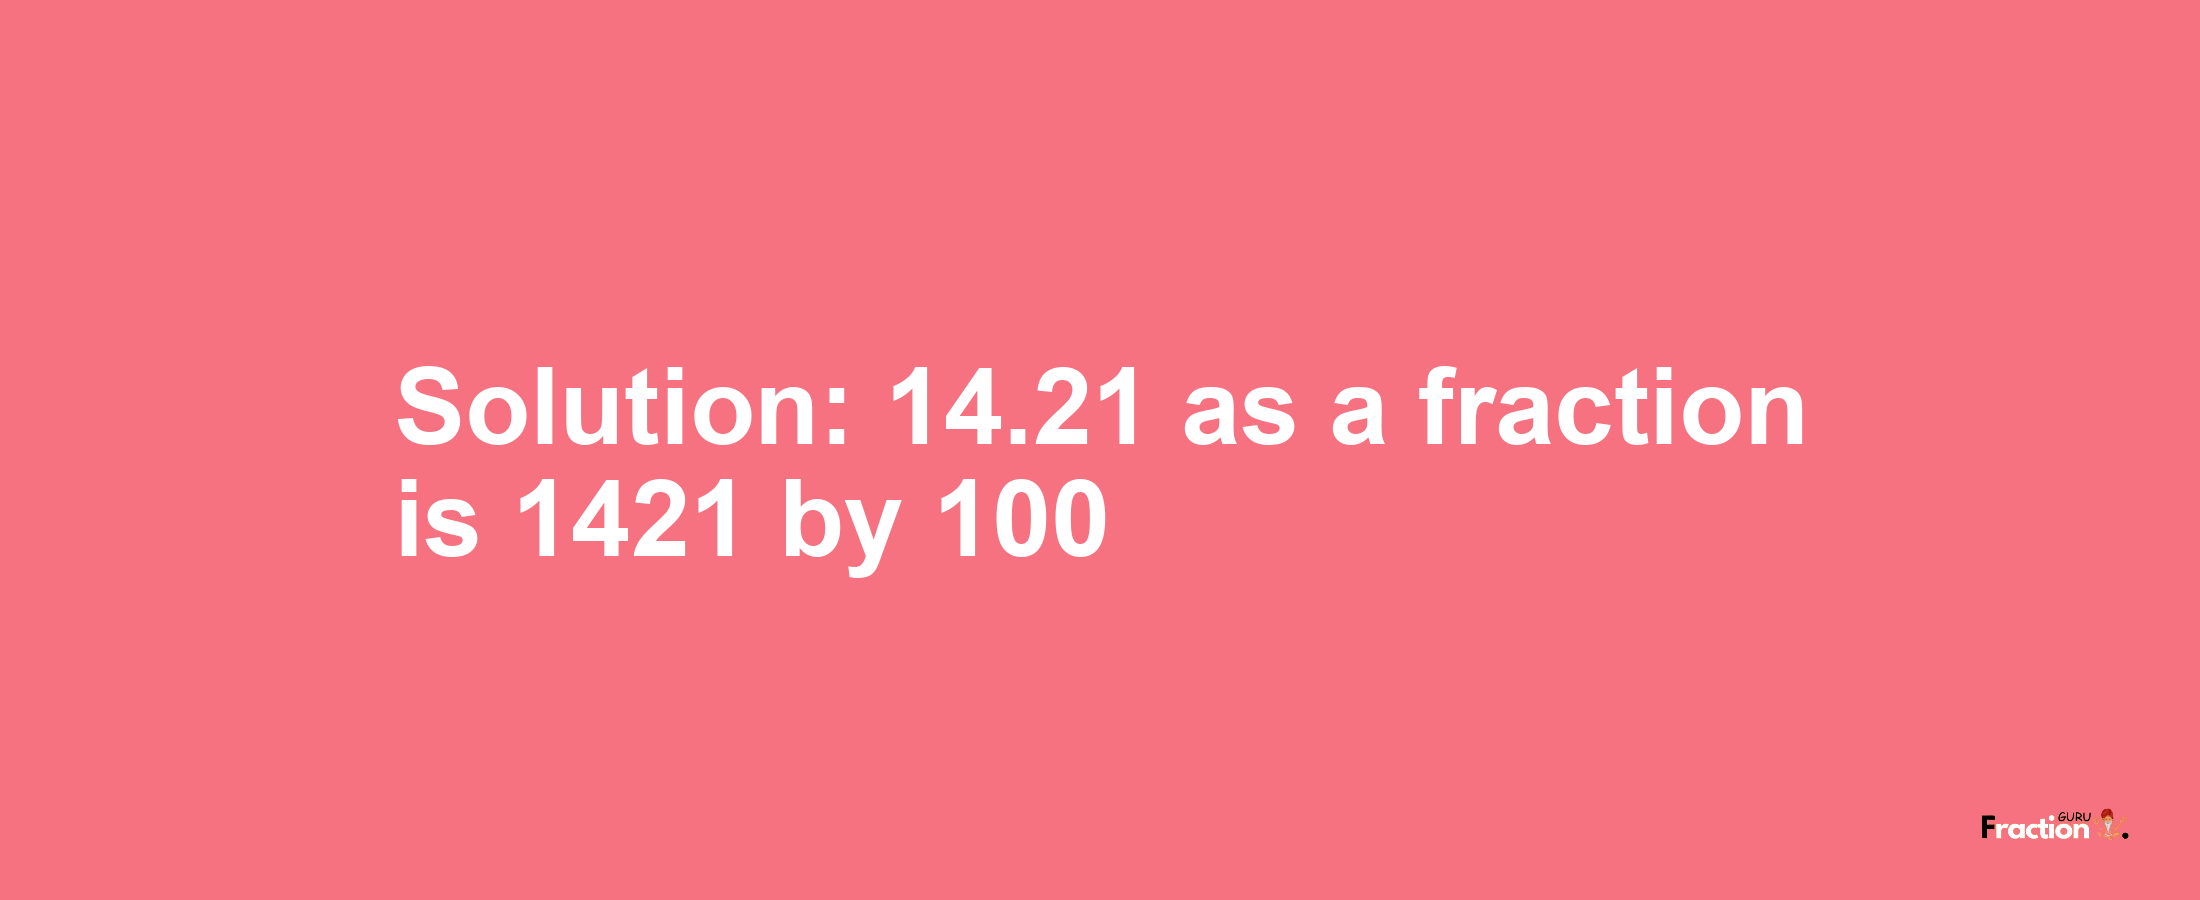 Solution:14.21 as a fraction is 1421/100